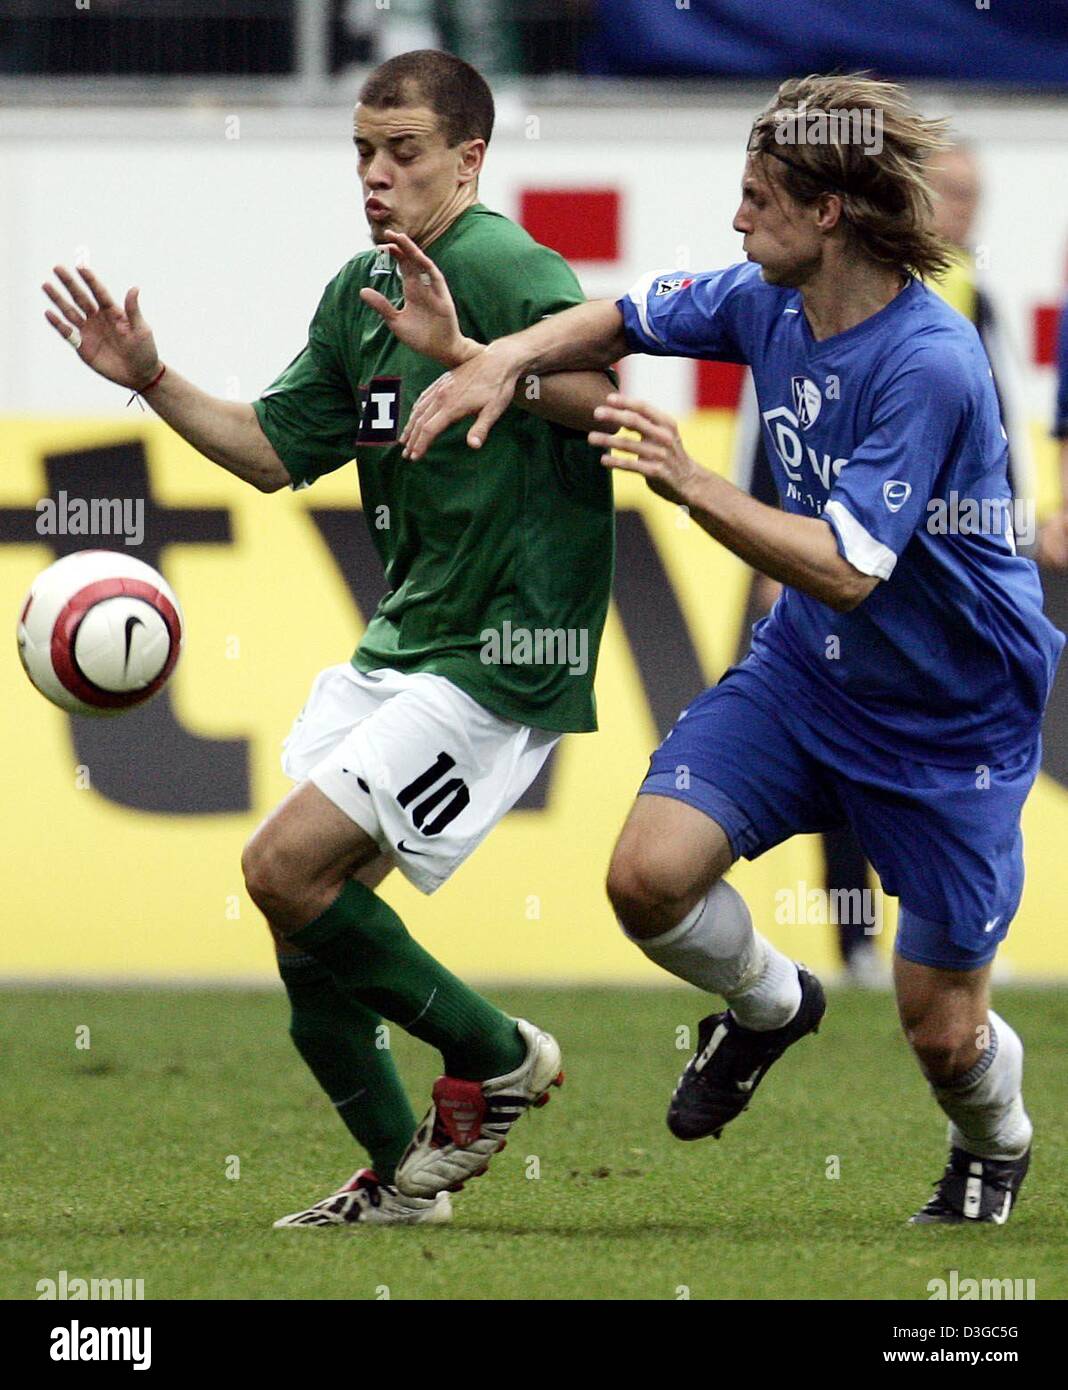 (dpa) - Wolfsburg's Andres D'Alessandro fights for the ball with Bochum's Philipp Boening (R) during the Bundesliga soccer game opposing VfL Wolfsburg and VfL Bochum in Wolfsburg, Germany, 23 October 2004. Stock Photo